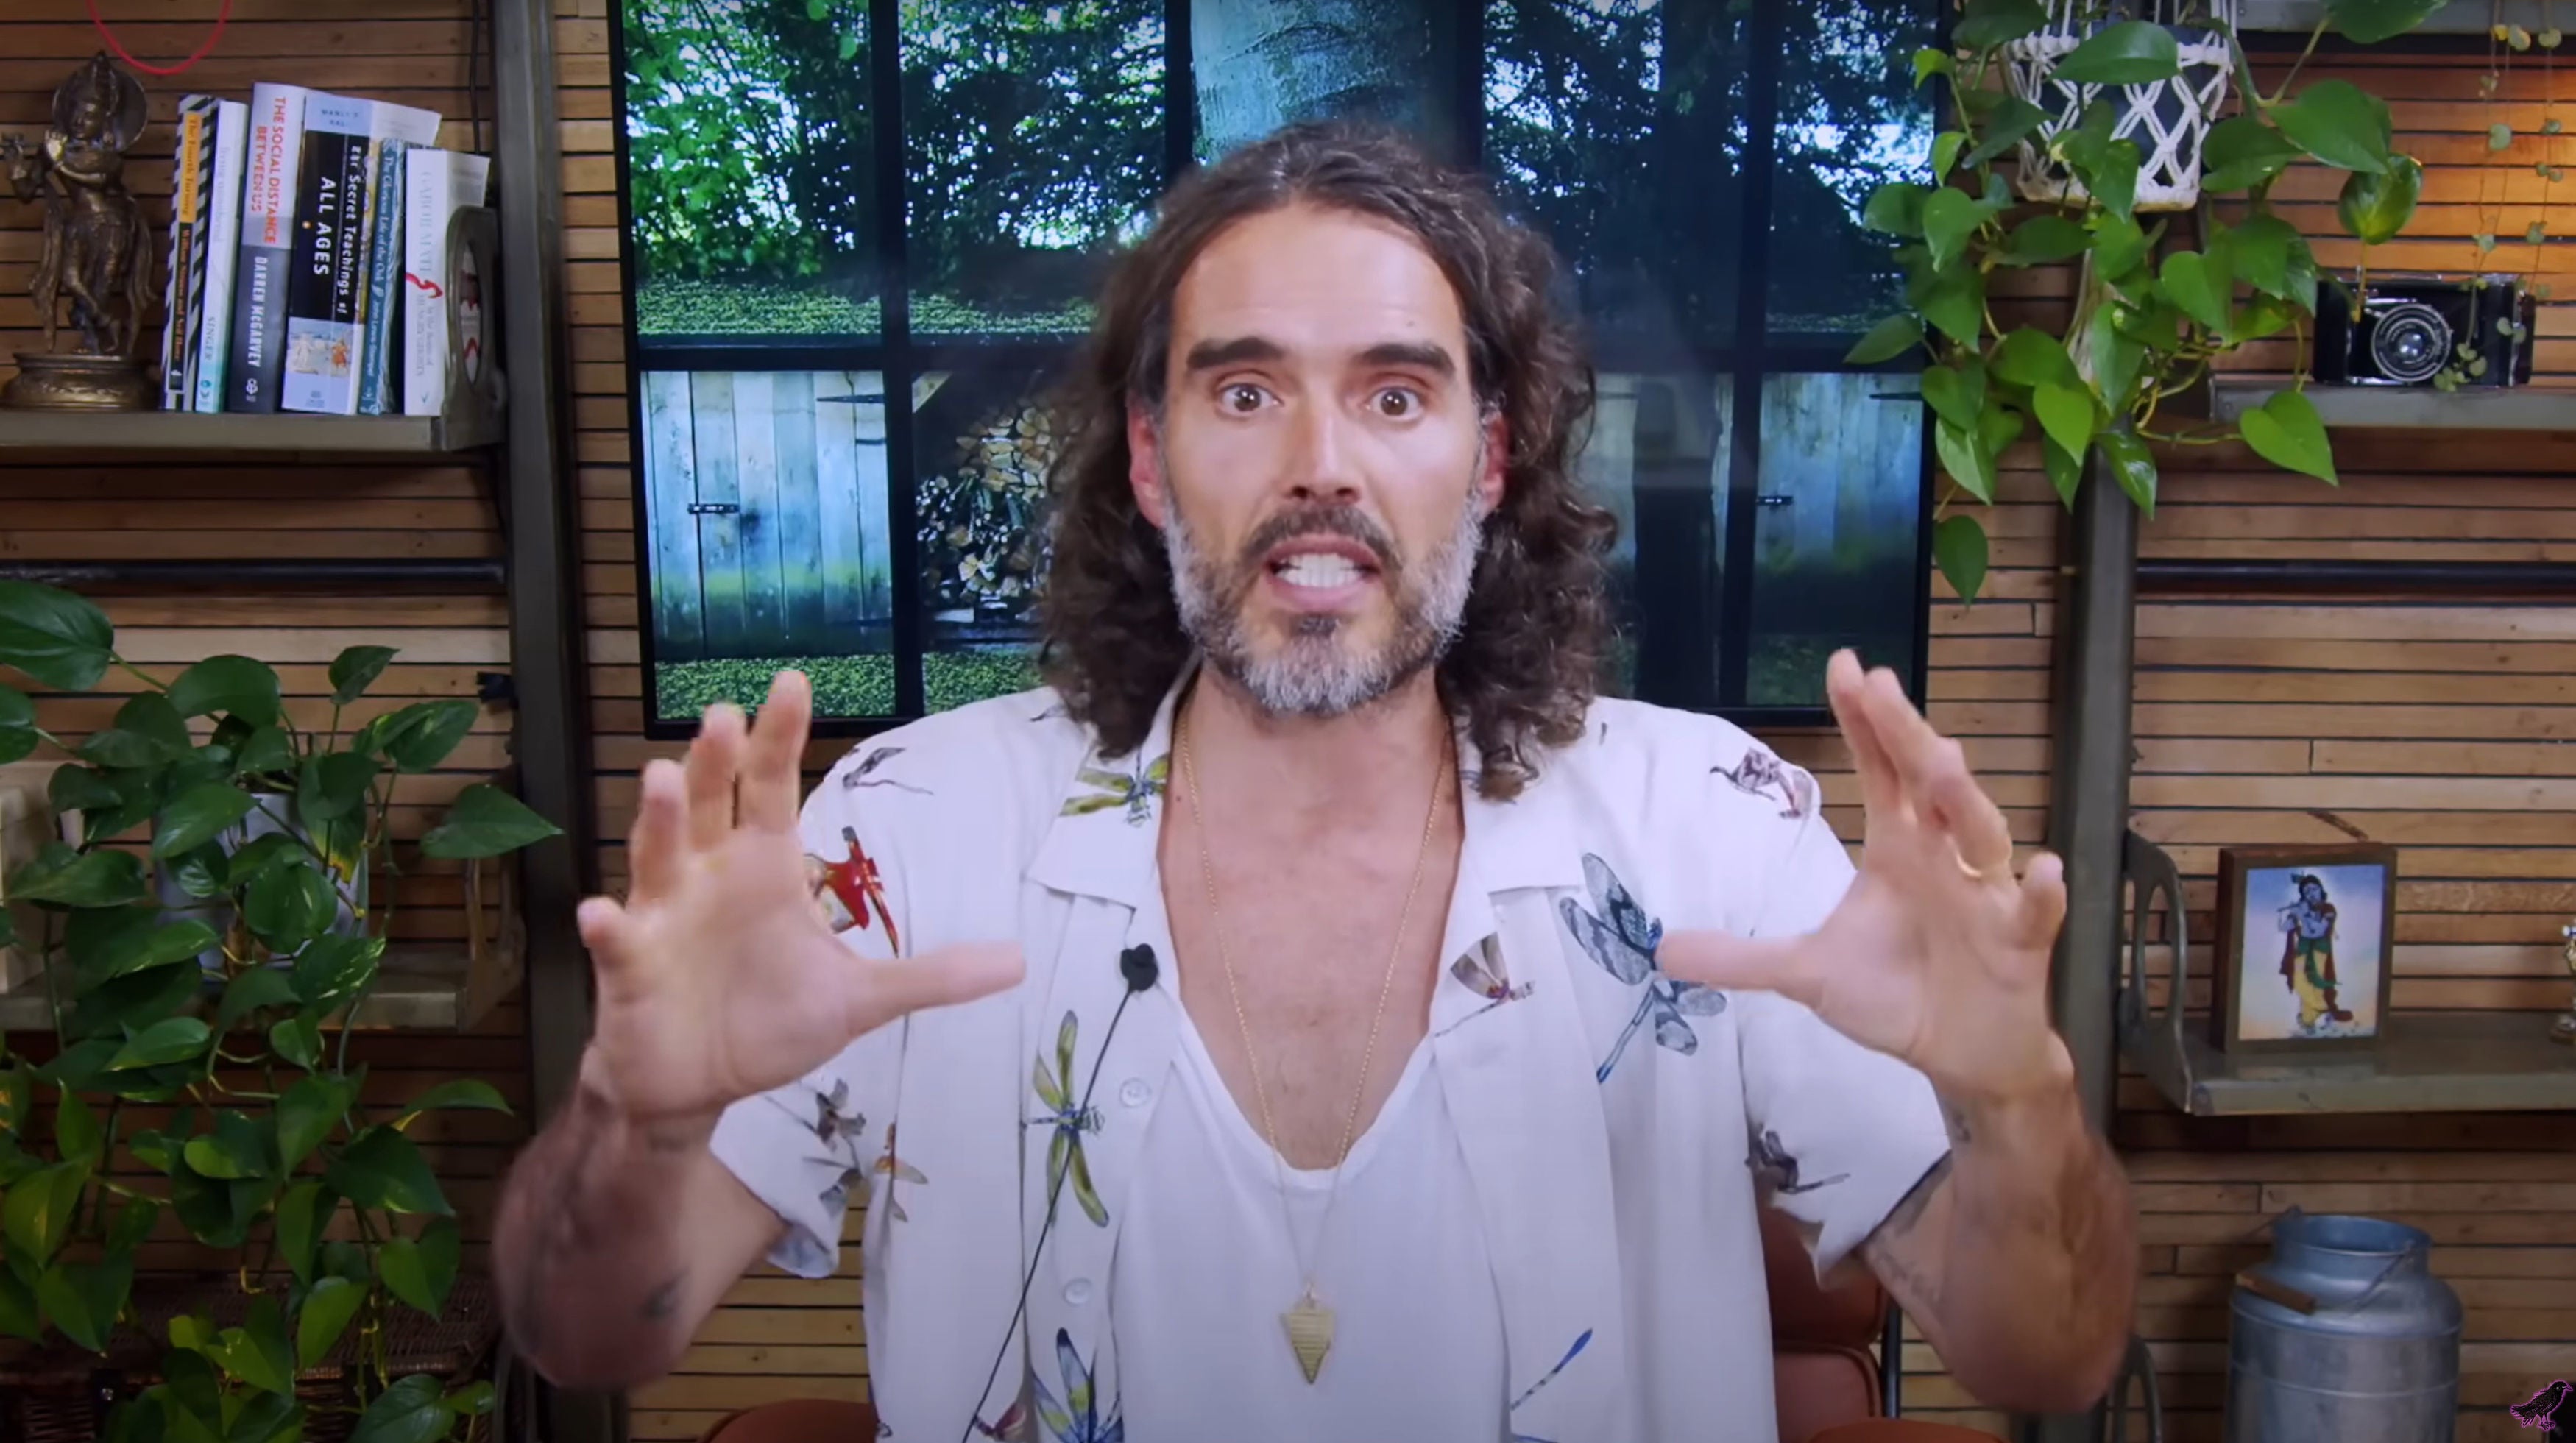 Russell Brand said the allegations make him question, ‘is there another agenda at play?’